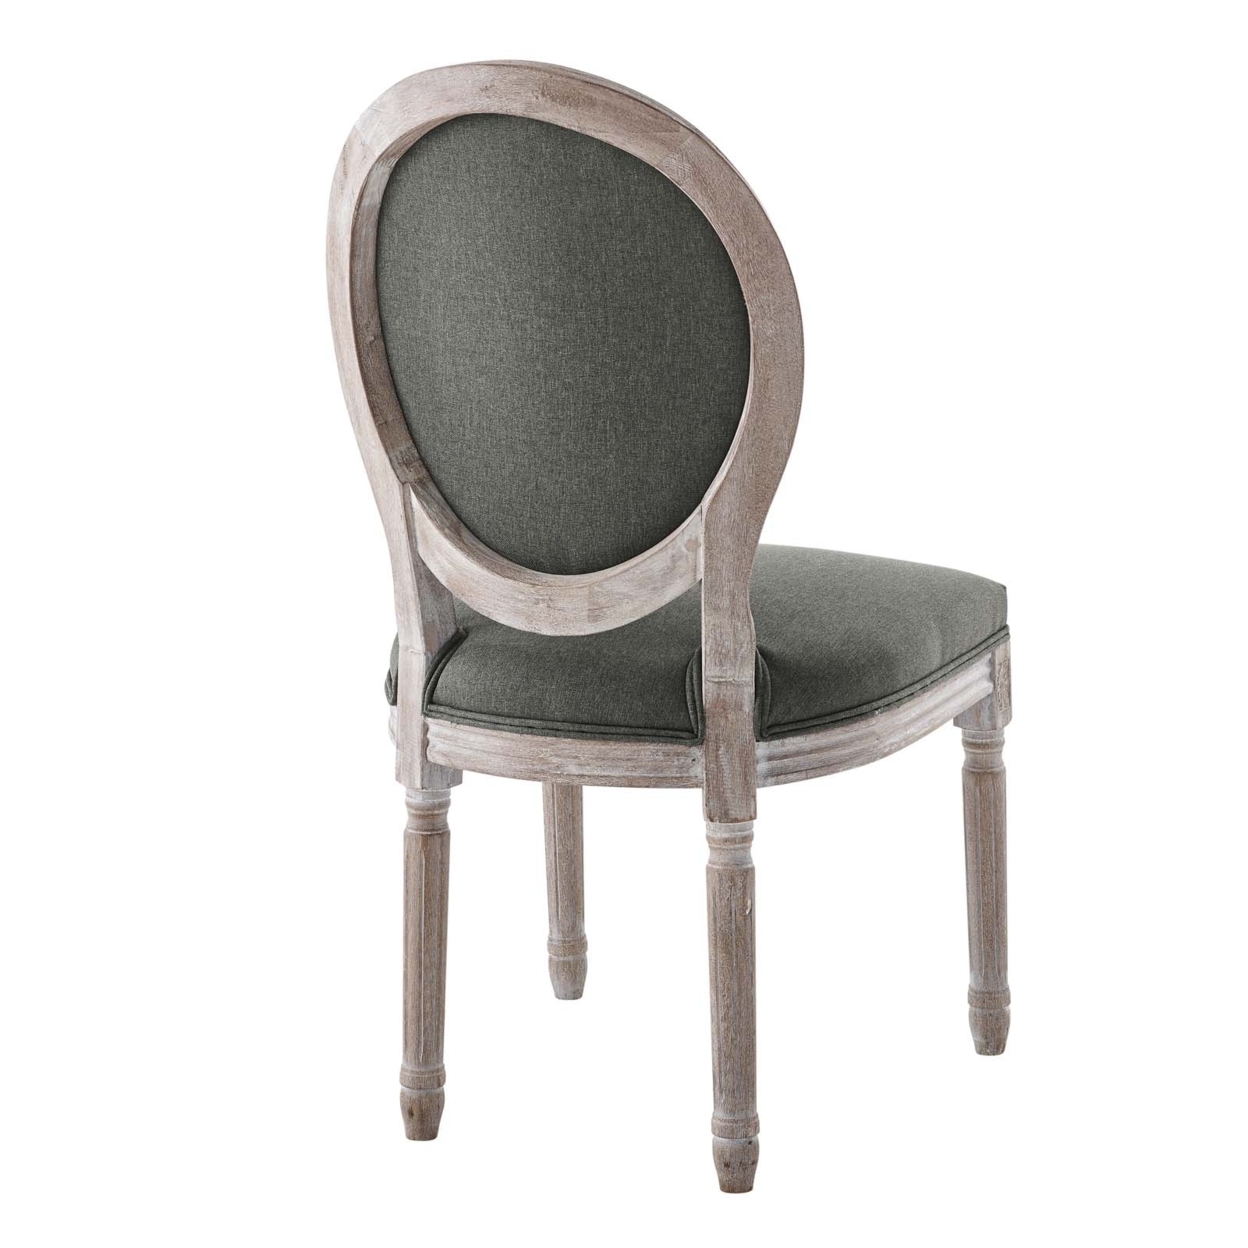 Emanate Vintage French Upholstered Fabric Dining Side Chair, Natural Gray